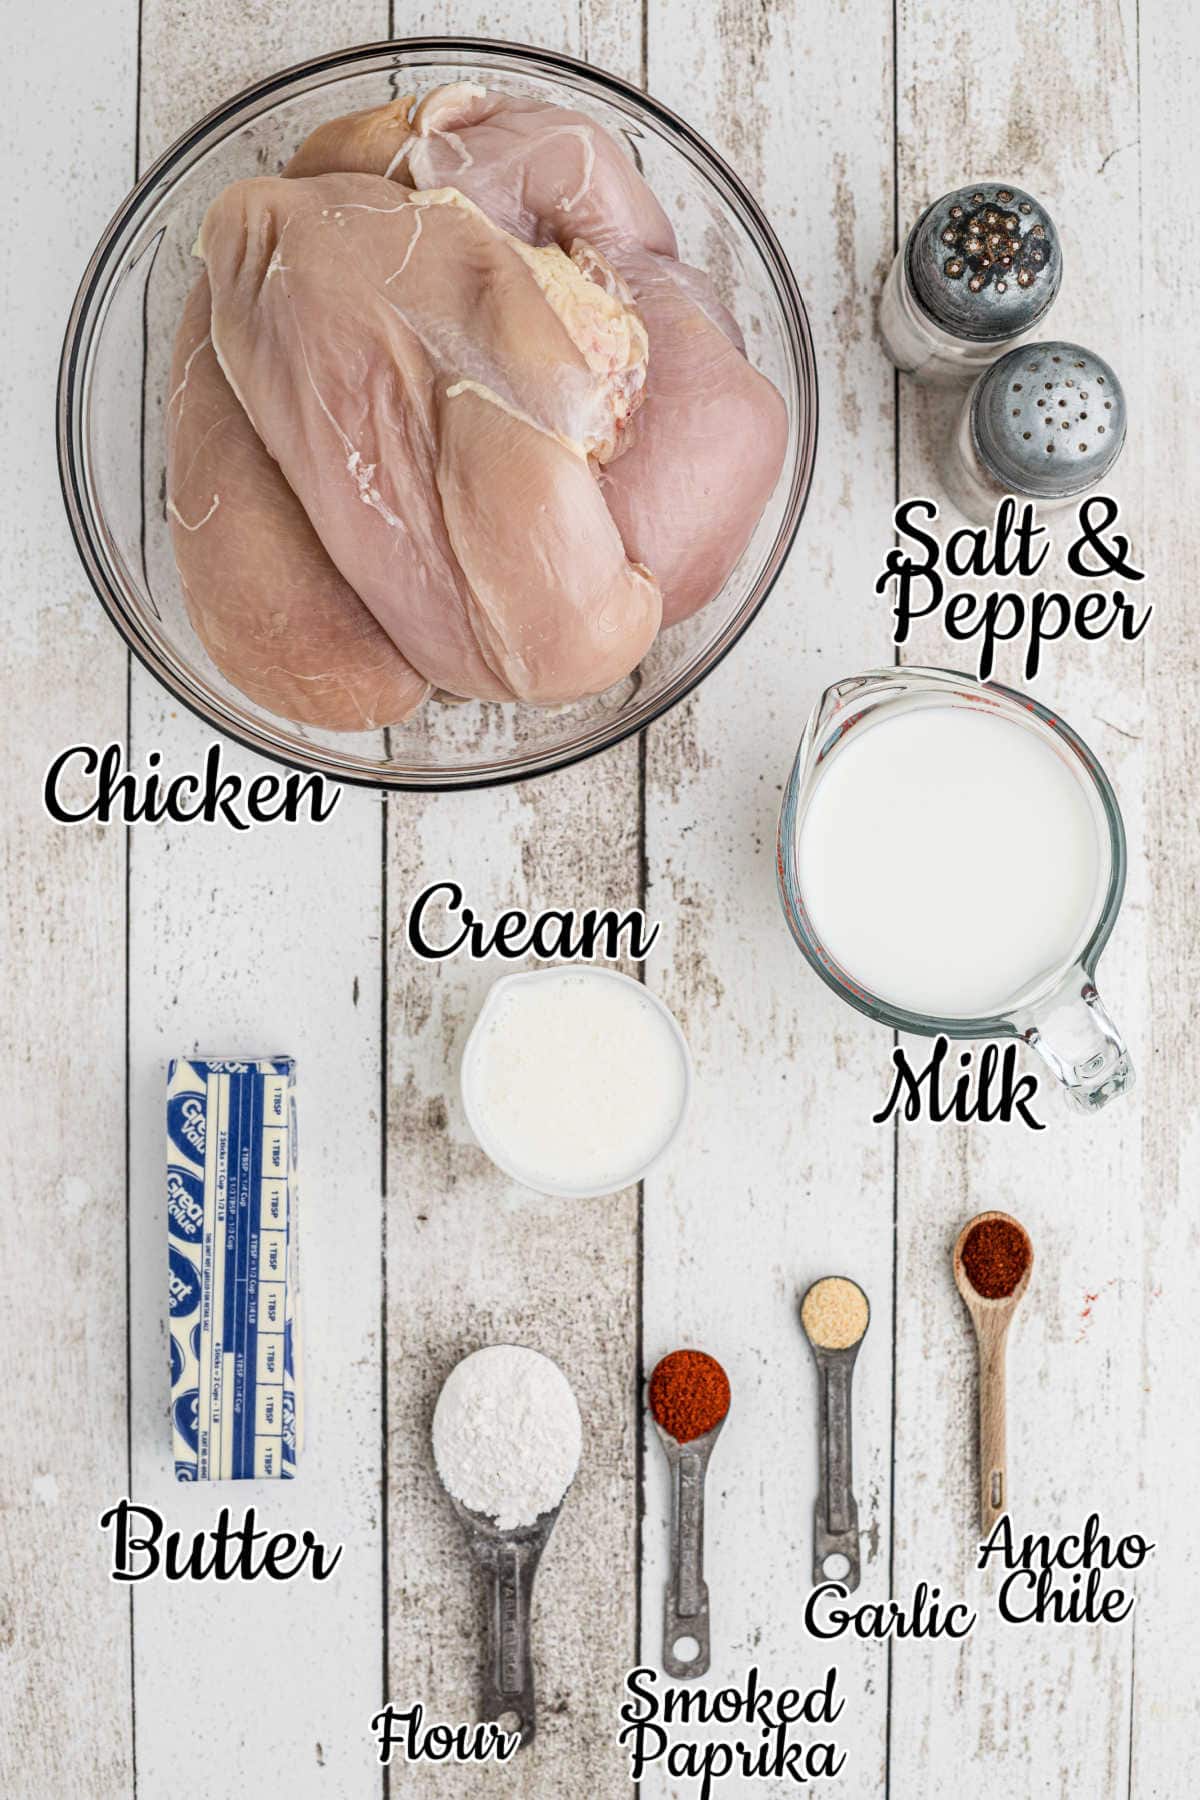 Labeled Ingredients for Chicken and Gravy.